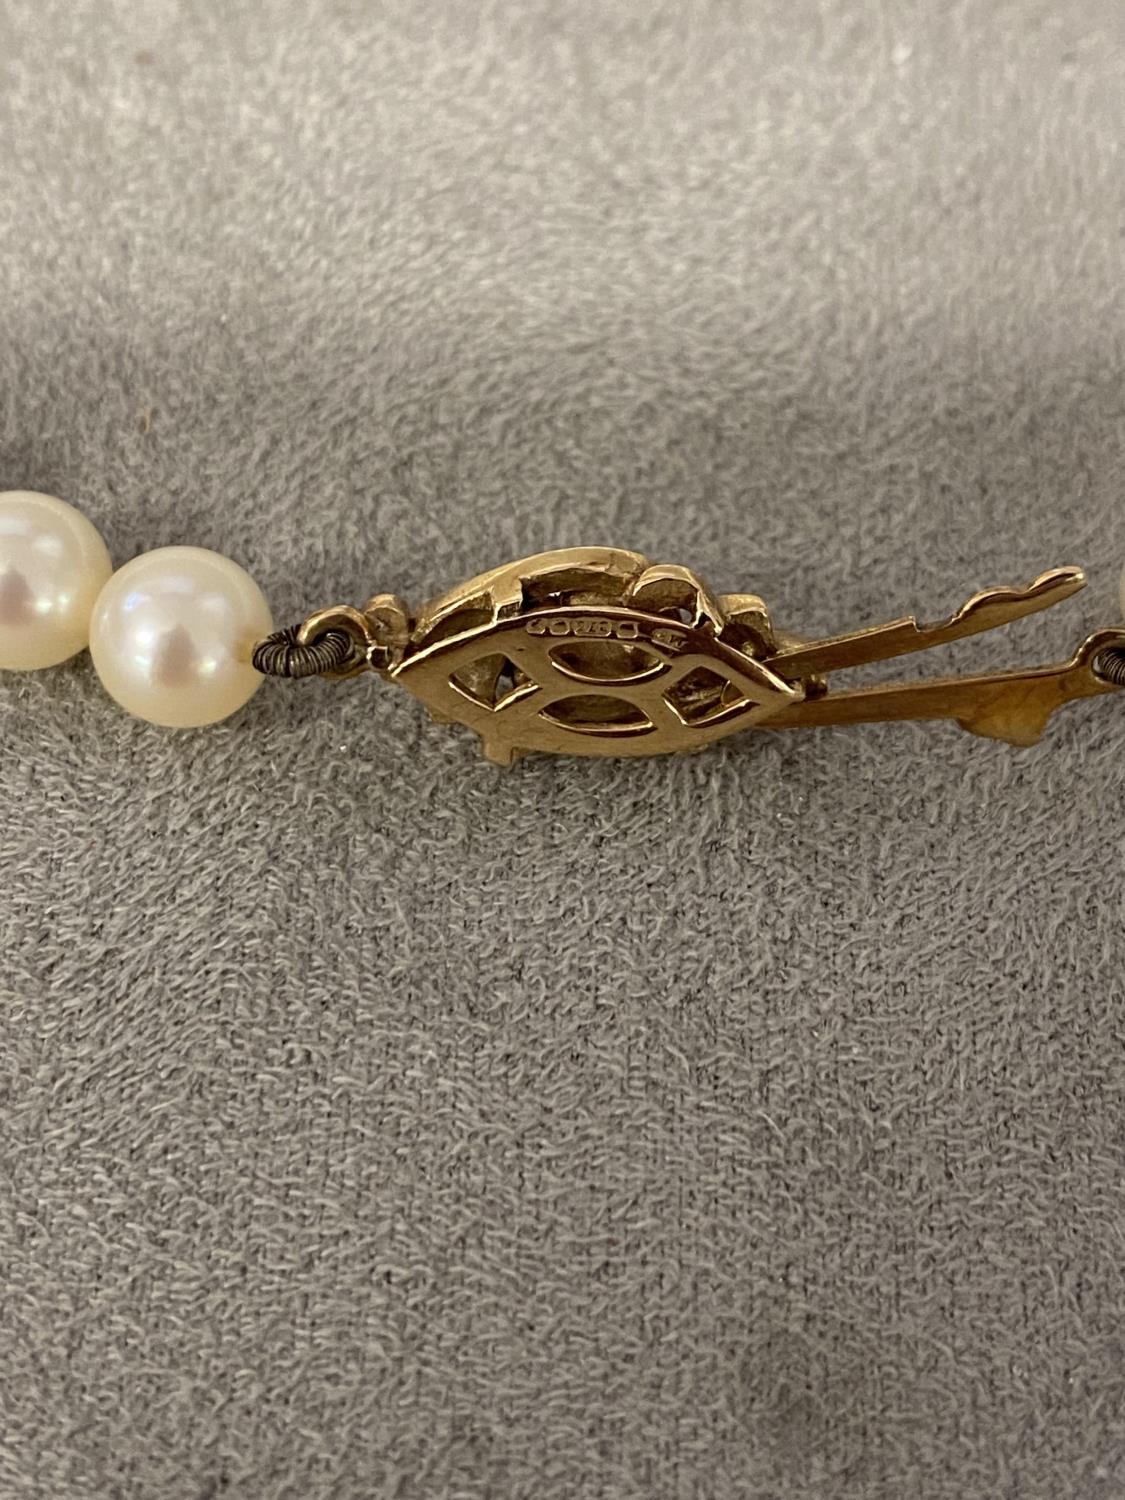 A single strand of cultured uniform pearls by Mikimoto on a 9ct gold clasp with box and certificate, - Image 4 of 5